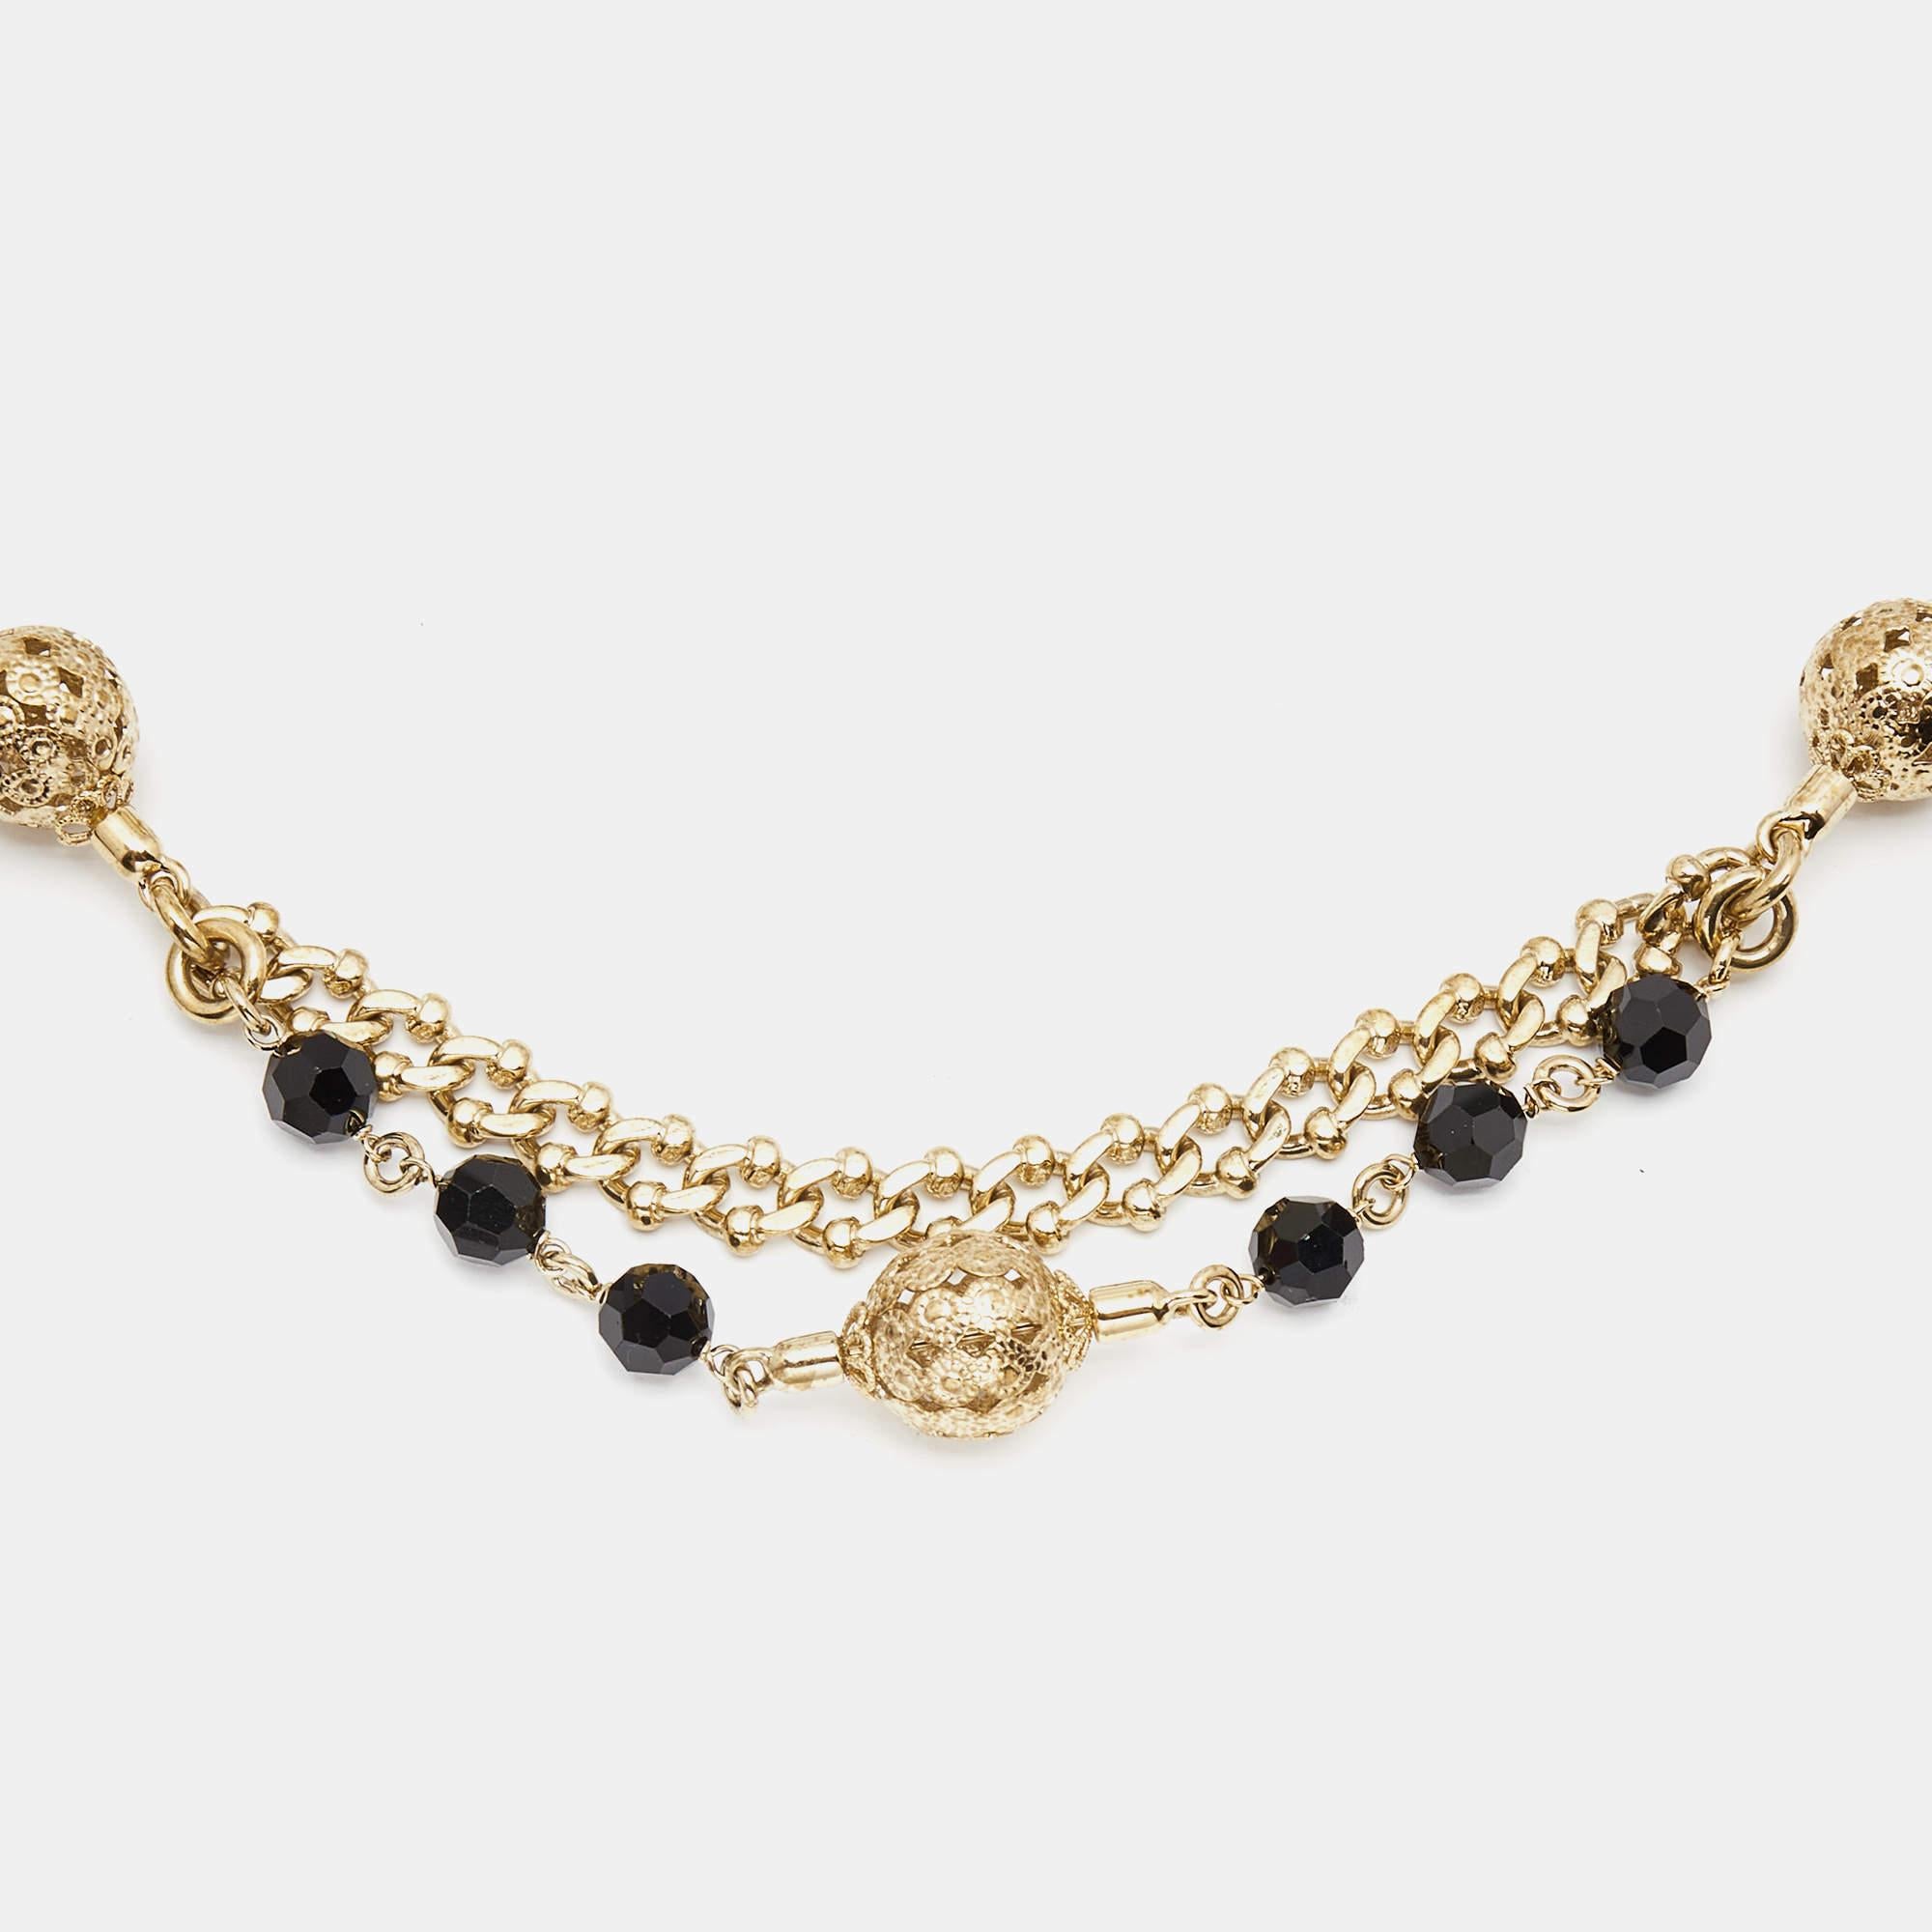 Made from black suede, it features a gold tone chain adorned with delicate beads. The belt adds a touch of elegance and glamour to any outfit, whether worn with jeans or a dress. It is a versatile piece that effortlessly enhances your waistline and